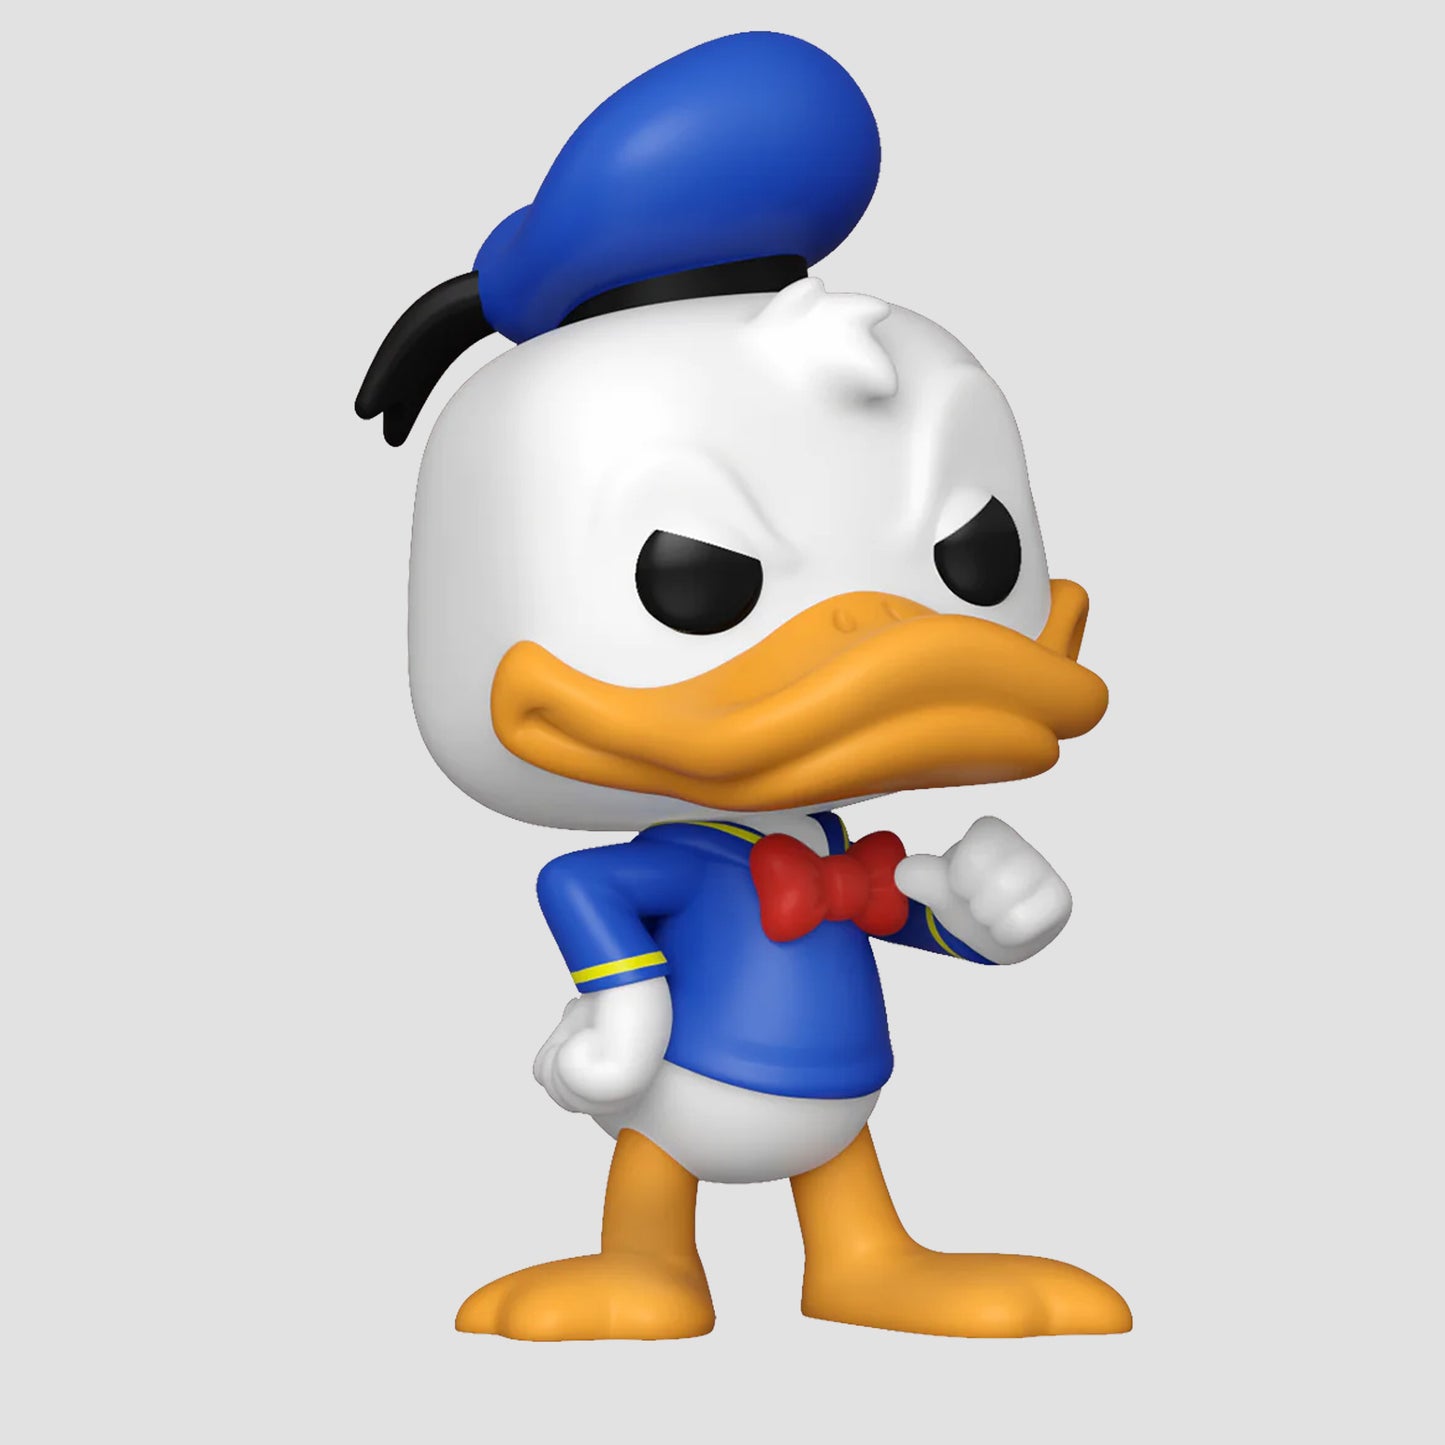 Load image into Gallery viewer, Donald Duck (Mickey and Friends) Disney Funko Pop!
